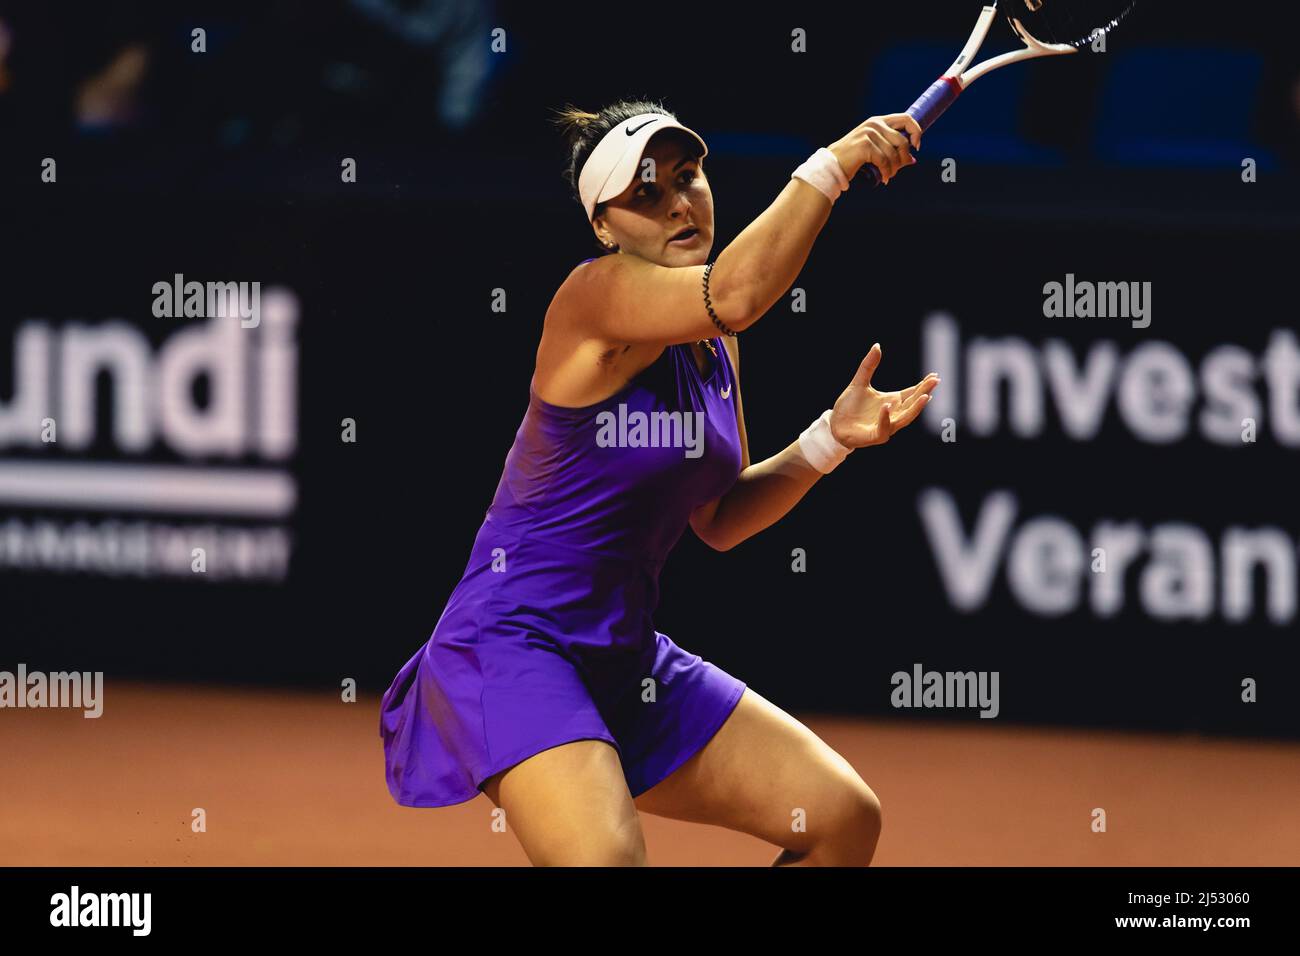 Bianca Andreescu High Resolution Stock Photography and Images - Alamy